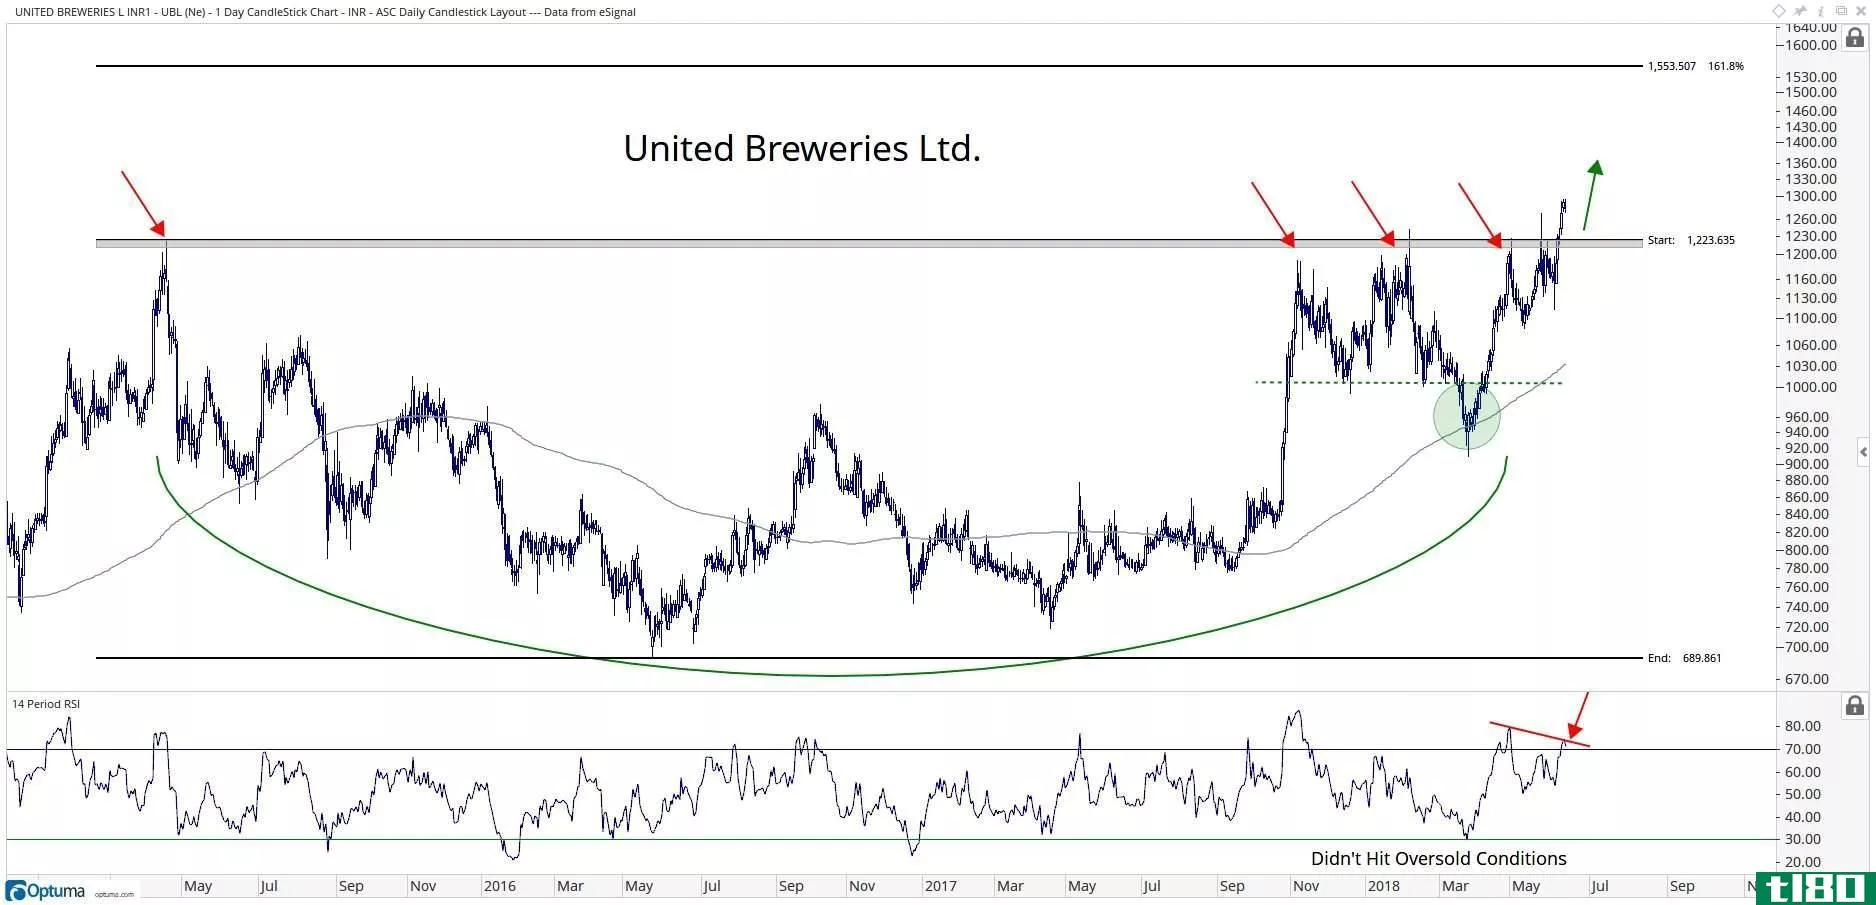 Technical chart showing the performance of United Breweries Limited (UBL.BO) stock